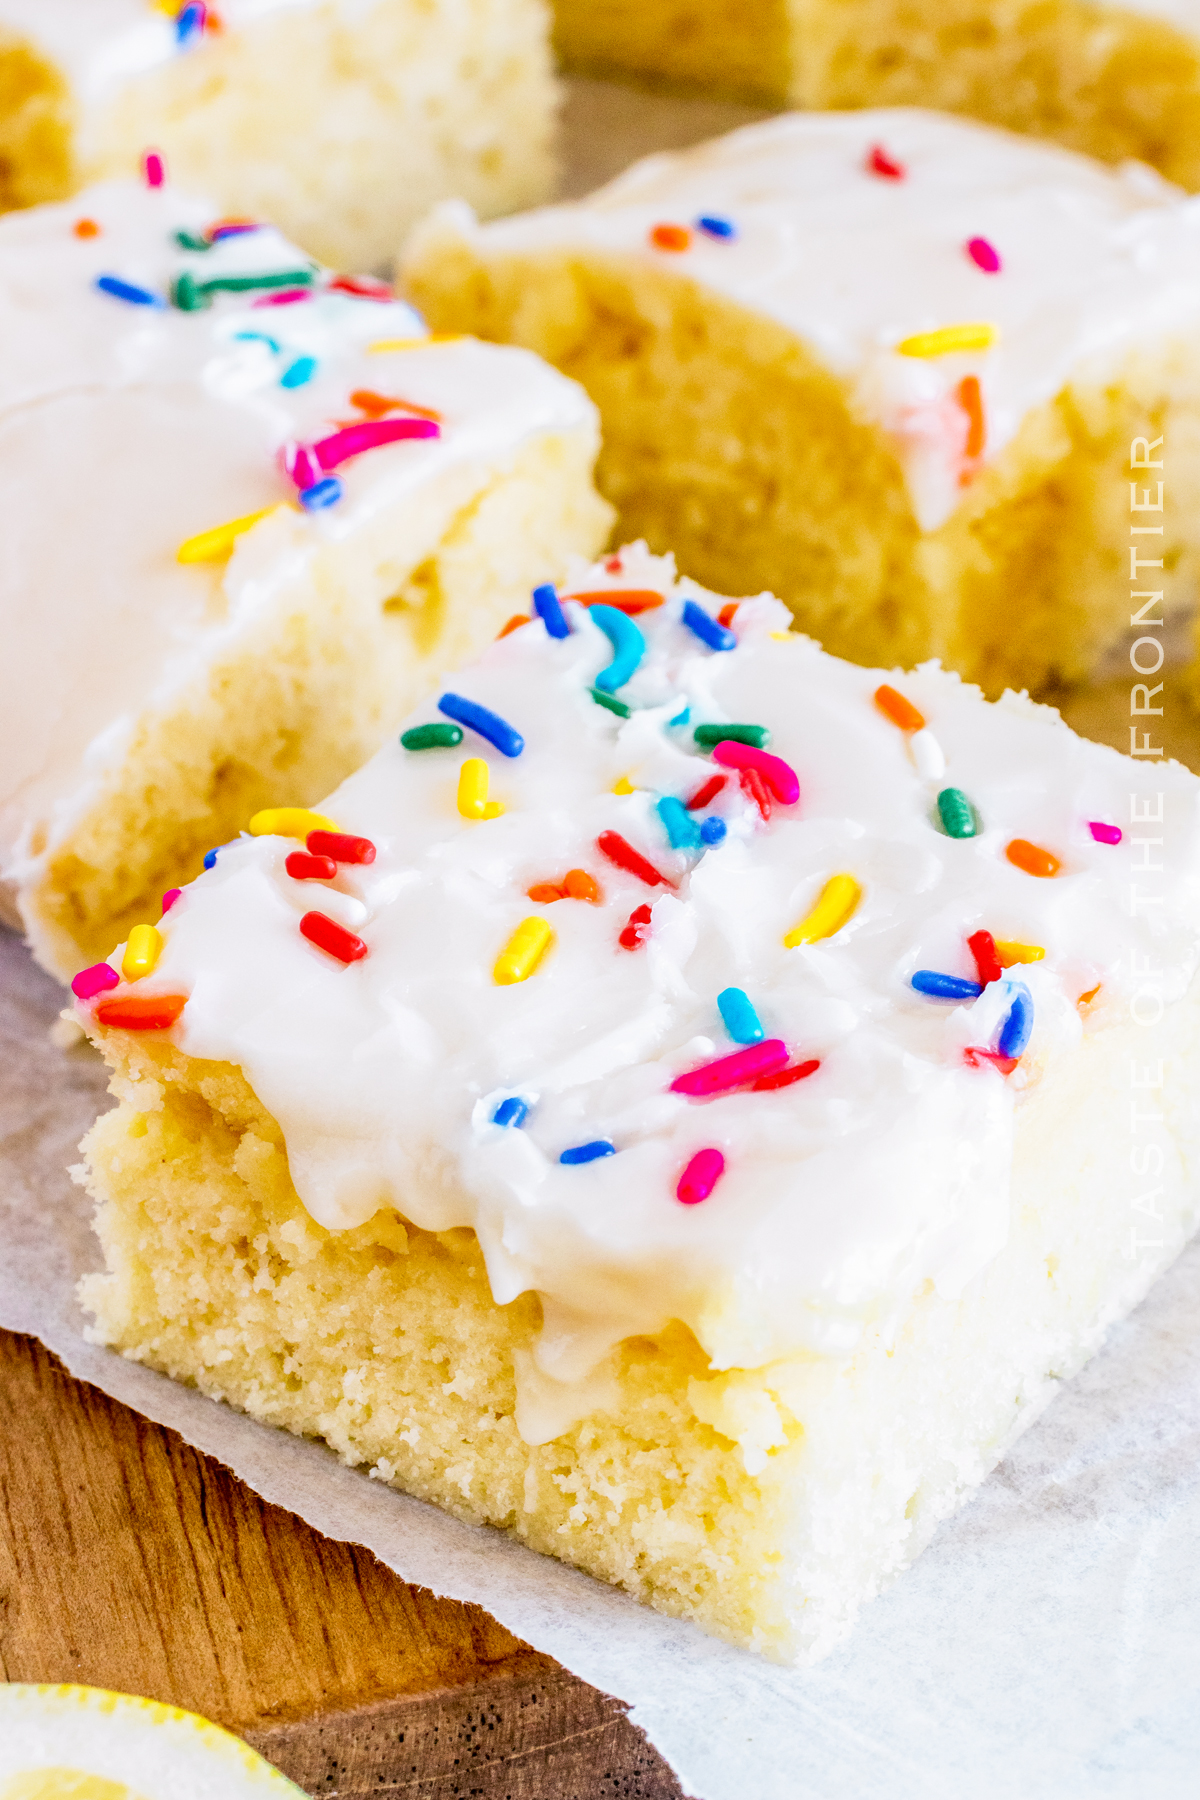 This Easy Instant Pot Cake Recipe Will Change Your Life - Food Fanatic